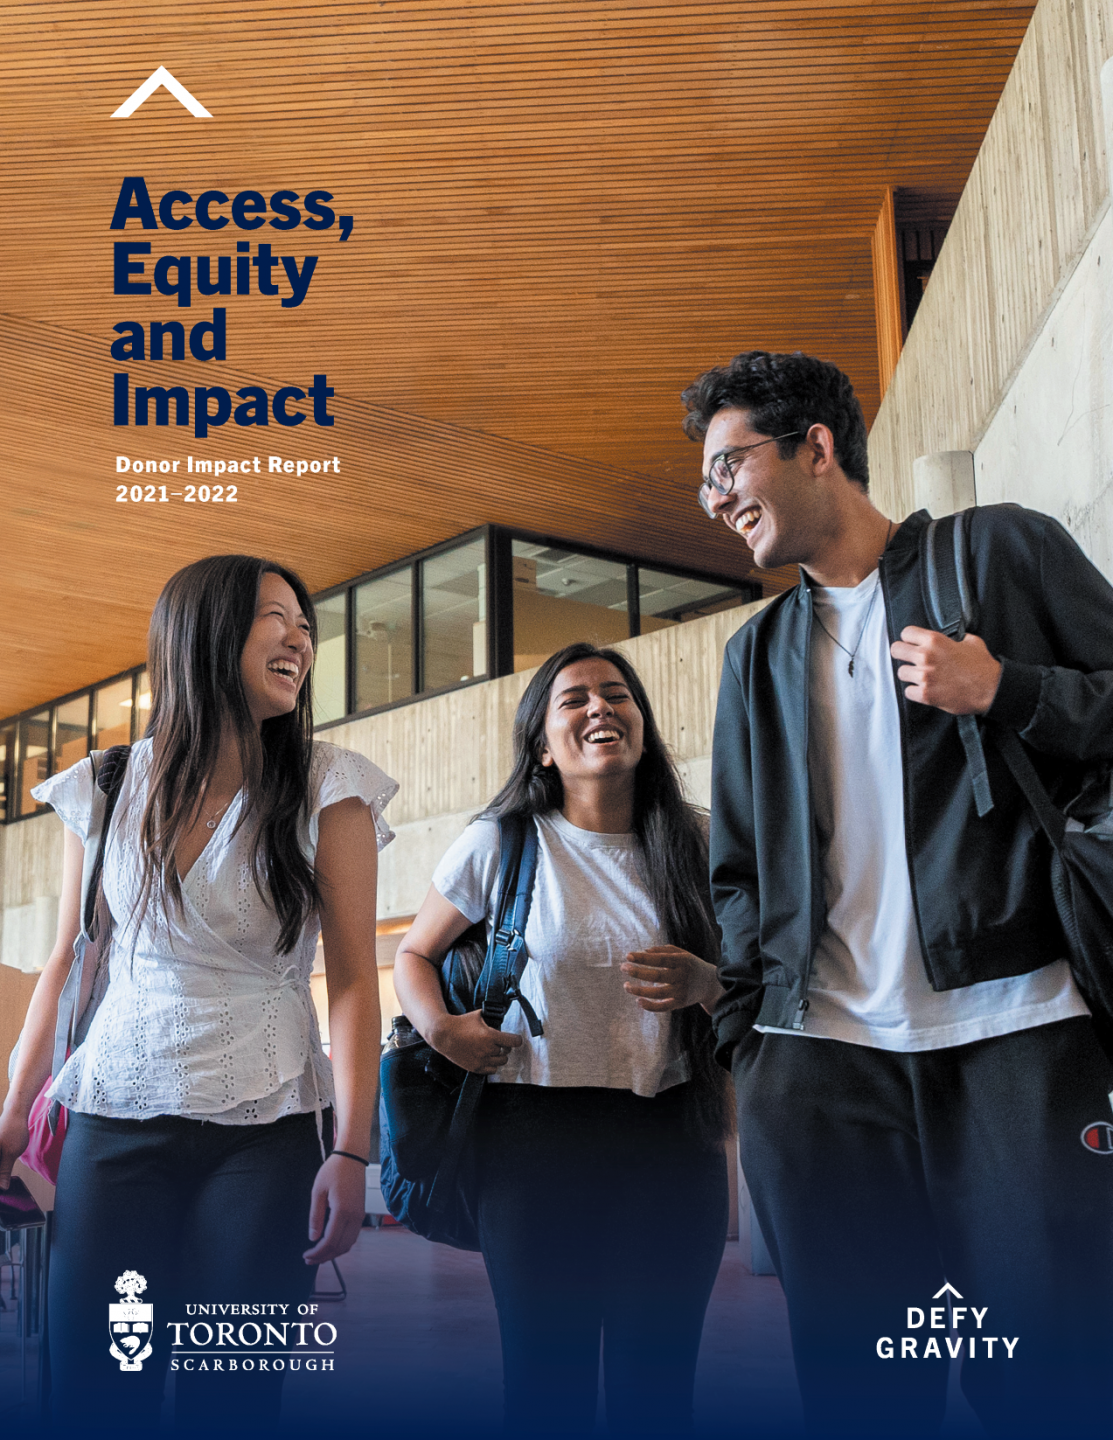 Cover of the Donor Impact Report featuring three similing students at UTSC